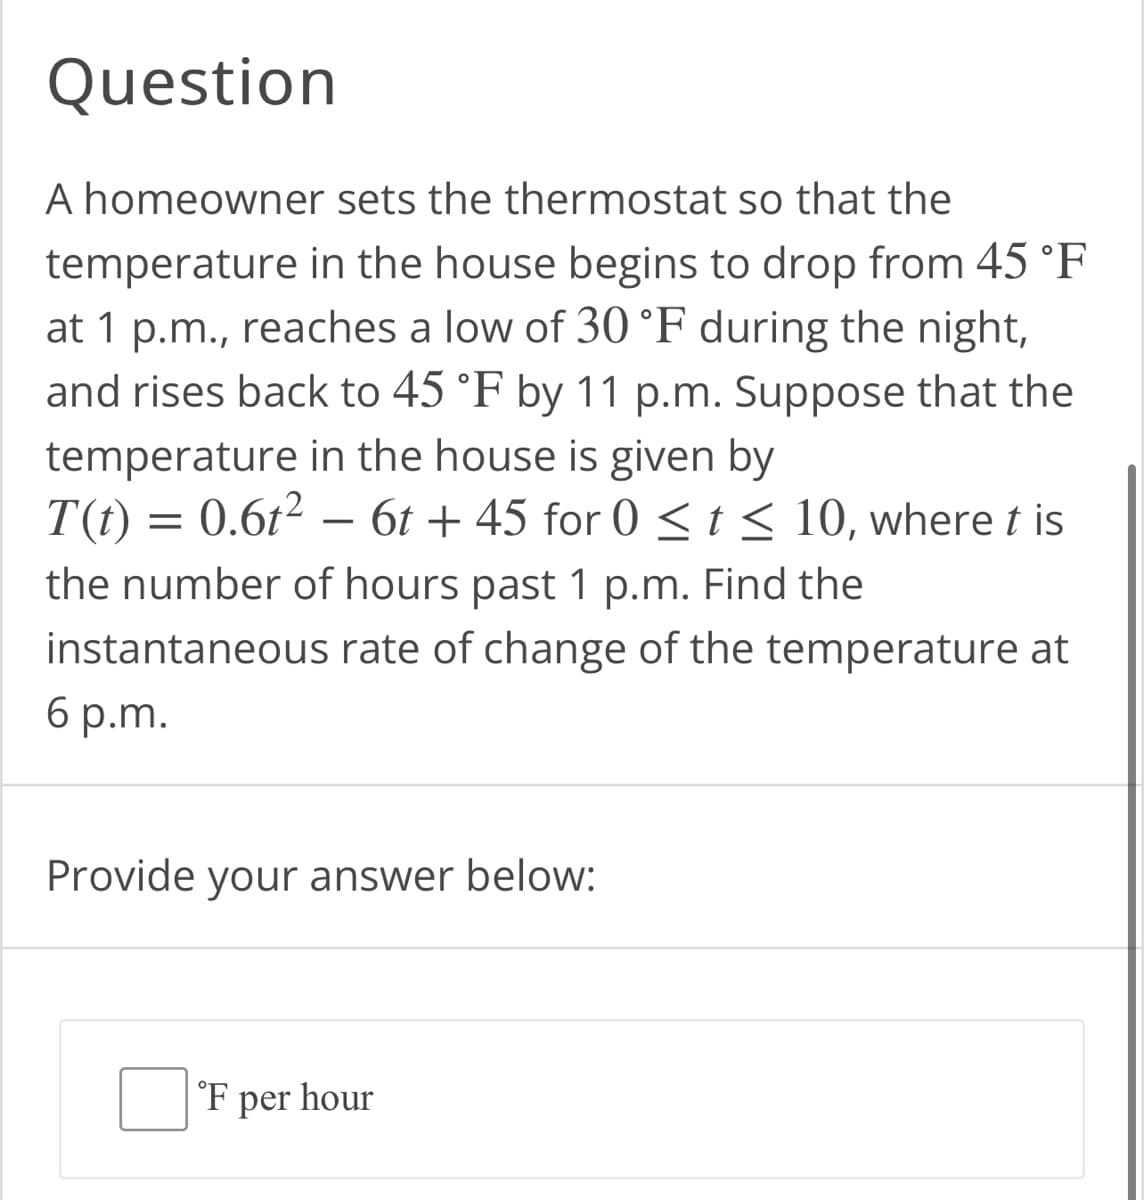 Question
A homeowner sets the thermostat so that the
temperature in the house begins to drop from 45 °F
at 1 p.m., reaches a low of 30 °F during the night,
and rises back to 45 °F by 11 p.m. Suppose that the
temperature in the house is given by
=
0.6t²6t+45 for 0 ≤ t ≤ 10, where t is
T(t)
the number of hours past 1 p.m. Find the
instantaneous rate of change of the temperature at
6 p.m.
Provide your answer below:
F per hour